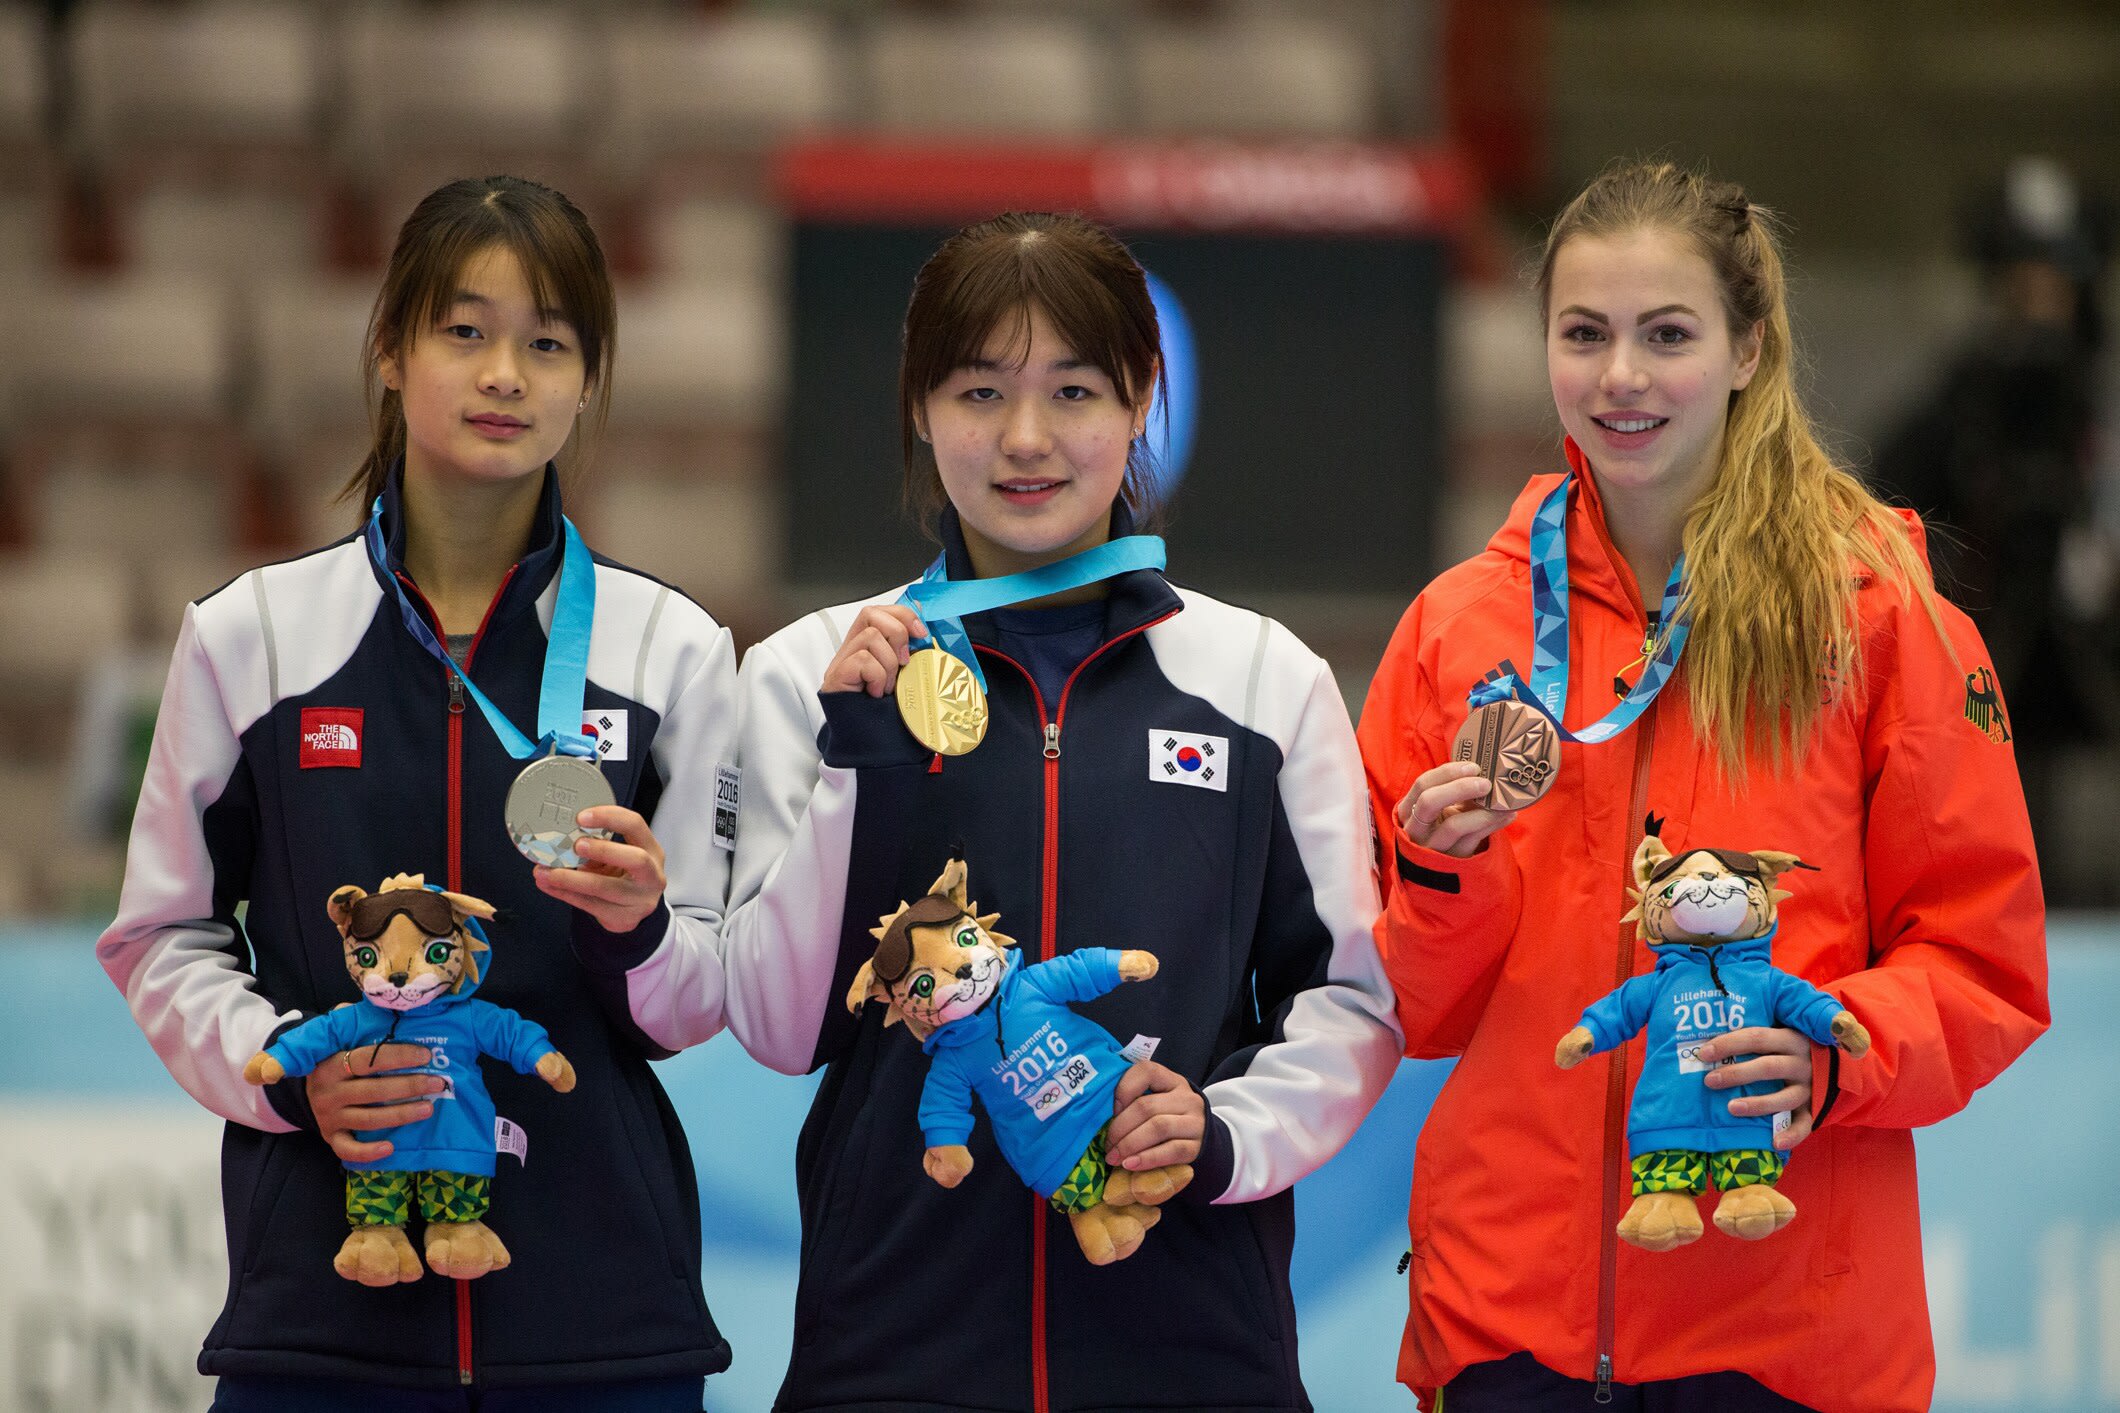 Korea's Kim Jiyoo (centre) with her gold medal, flanked by compatriot Lee Suyoun (left, silver) and Germany's Anna Seidel (right, bronze) after the ladies' short track speed skating 1000m final. Photo: YIS / IOC Al Tielemans